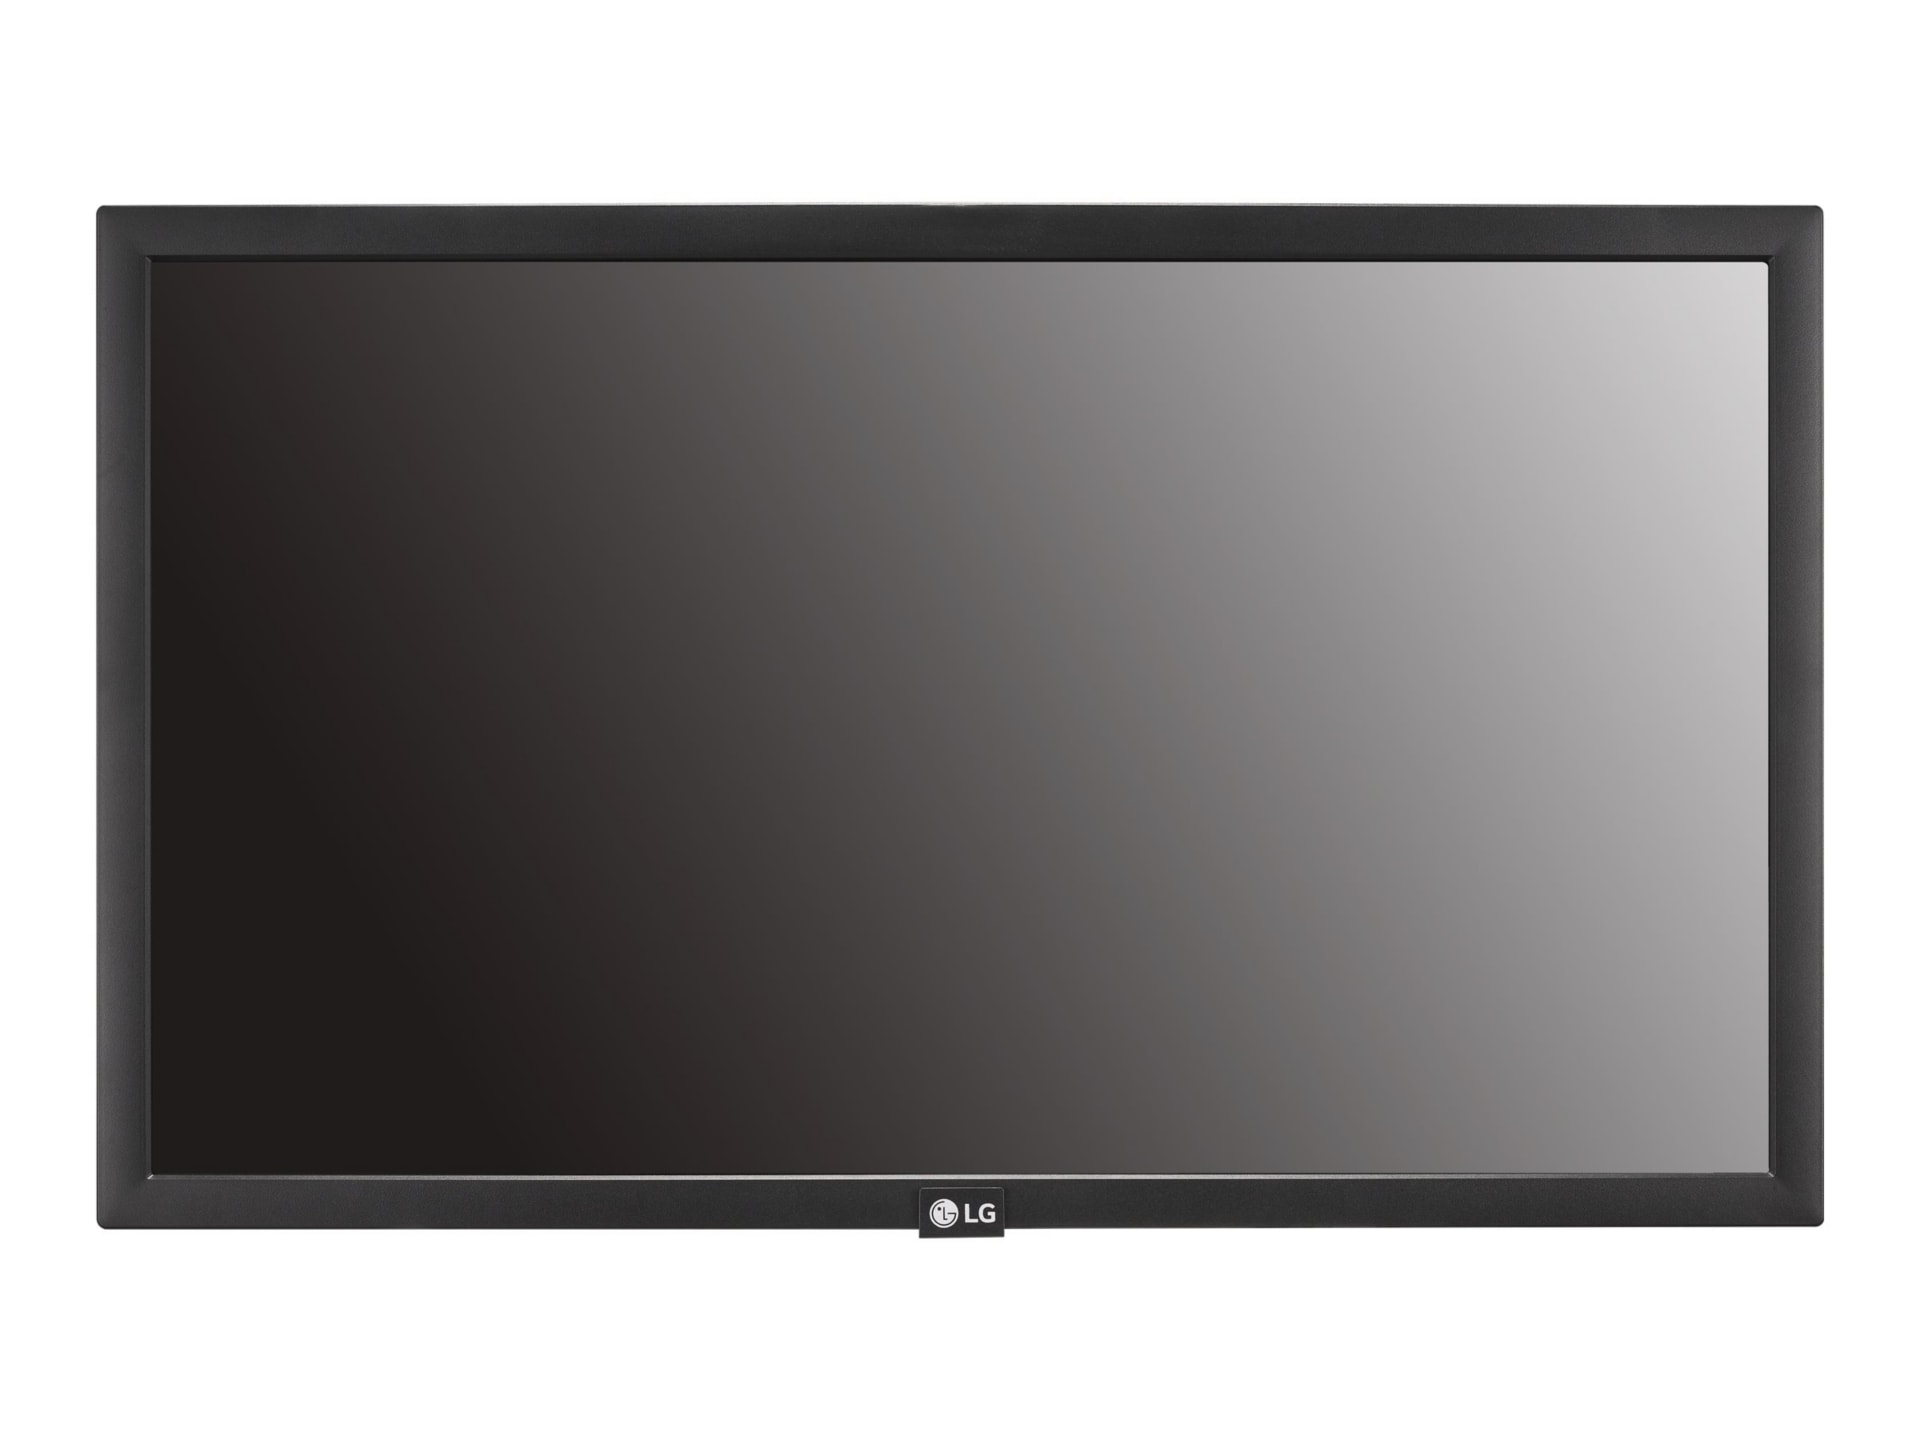 LG 22SM3B-B SM3G Series - 22" Class (21.5" viewable) with Integrated Pro:Idiom LED-backlit LCD display - Full HD - for